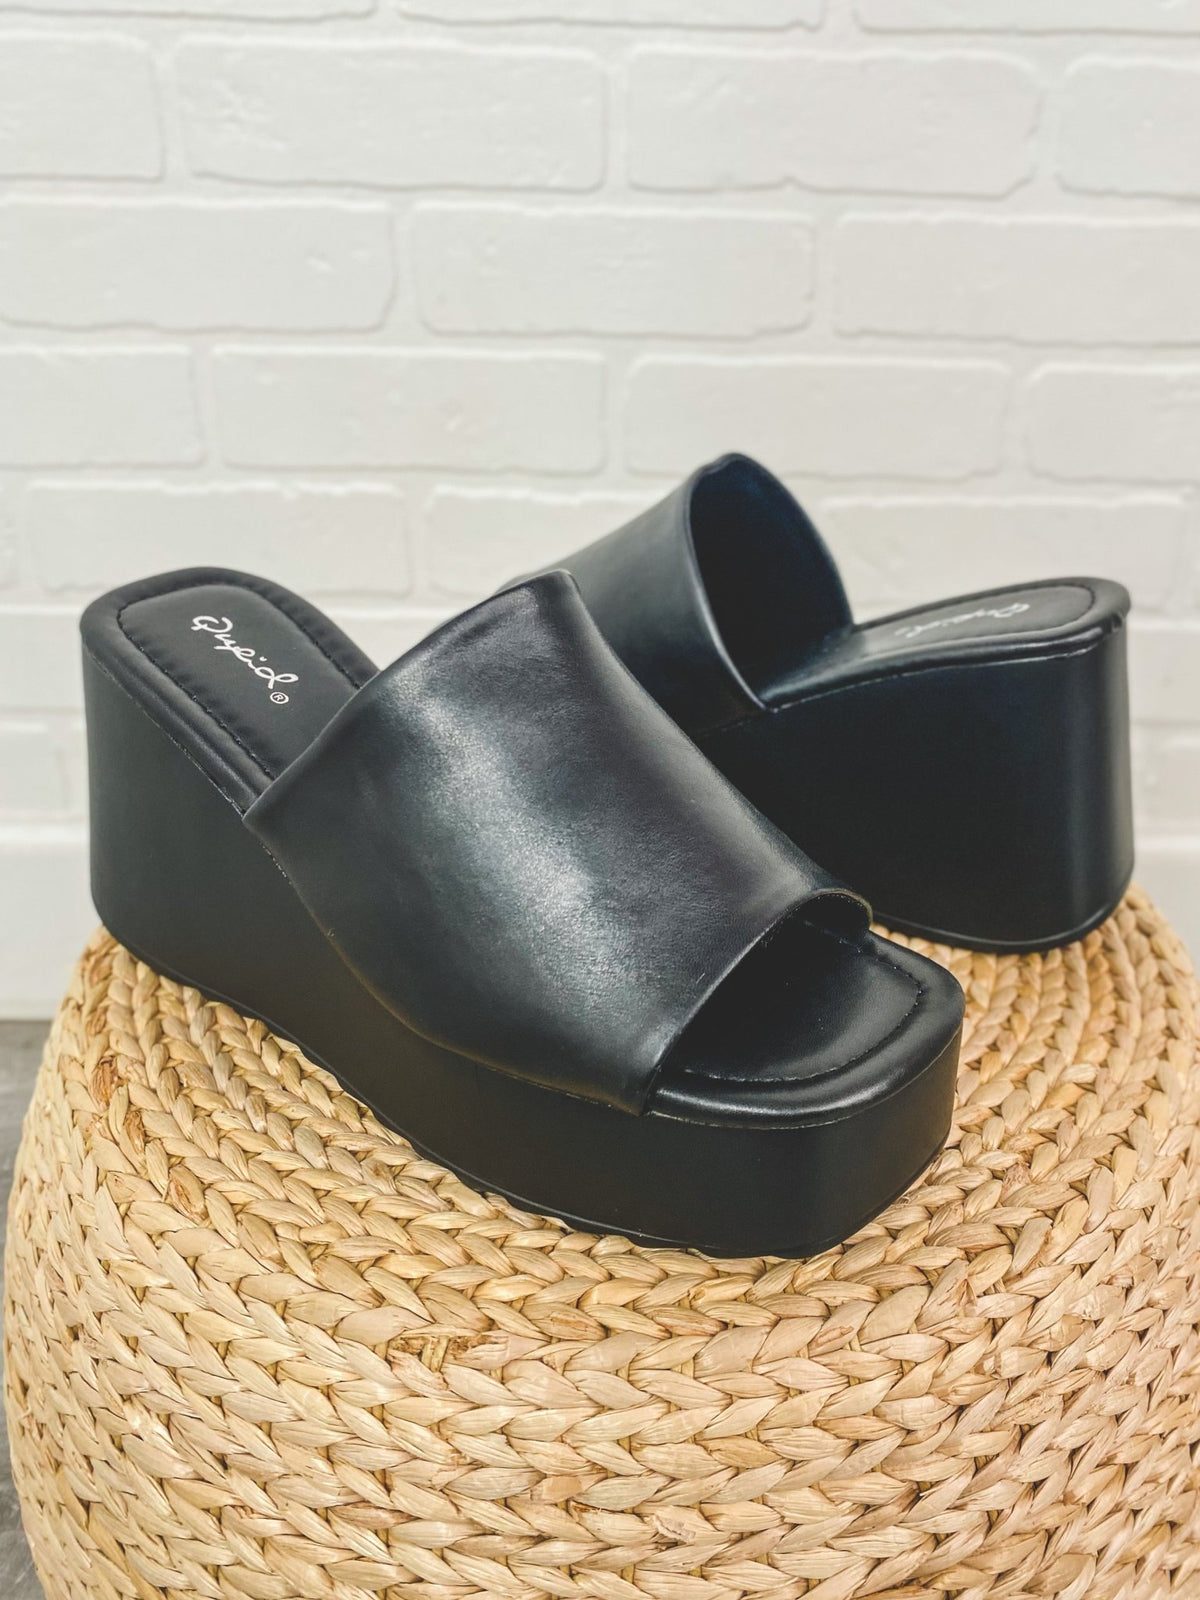 Afton one band sandal black - Cute Shoes - Trendy Shoes at Lush Fashion Lounge Boutique in Oklahoma City